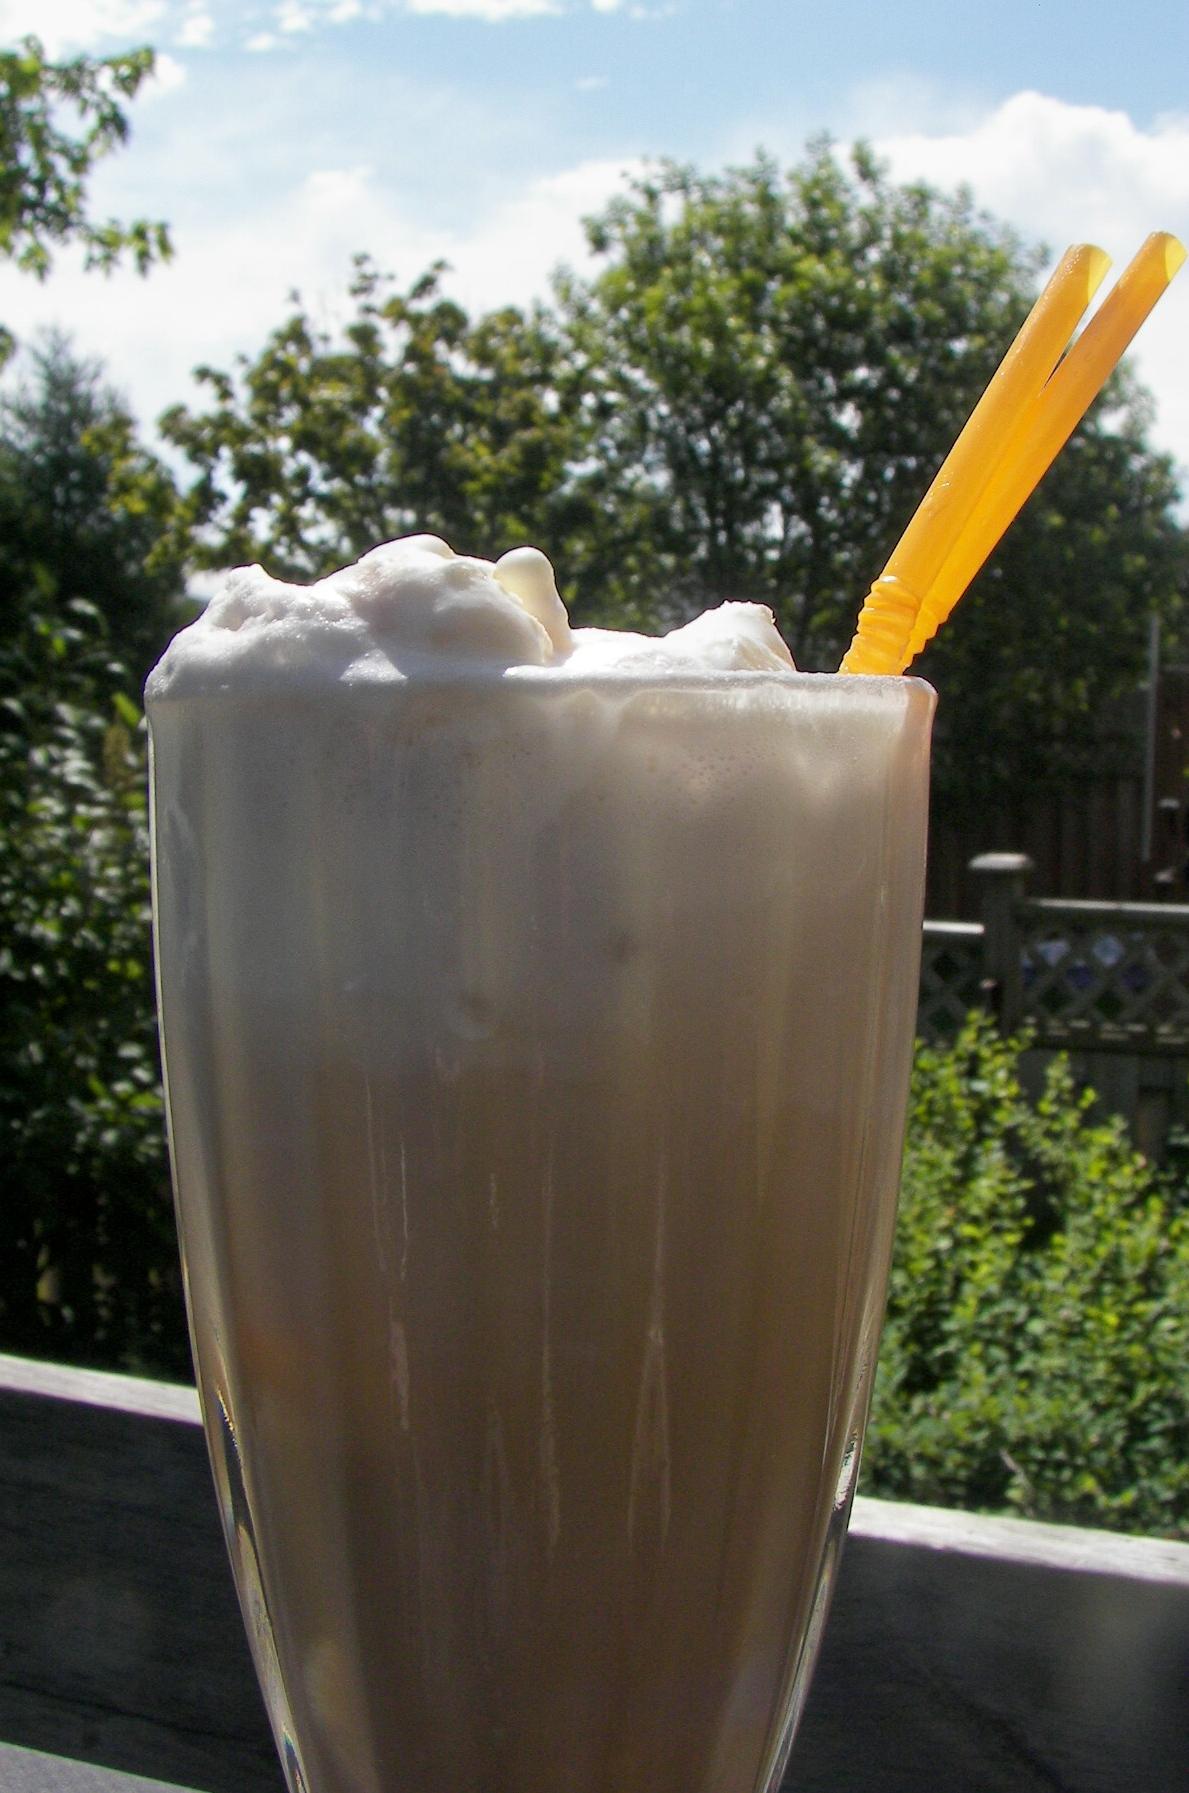  Satisfy your cravings with this irresistible Mocha-Cream Iced Soda.